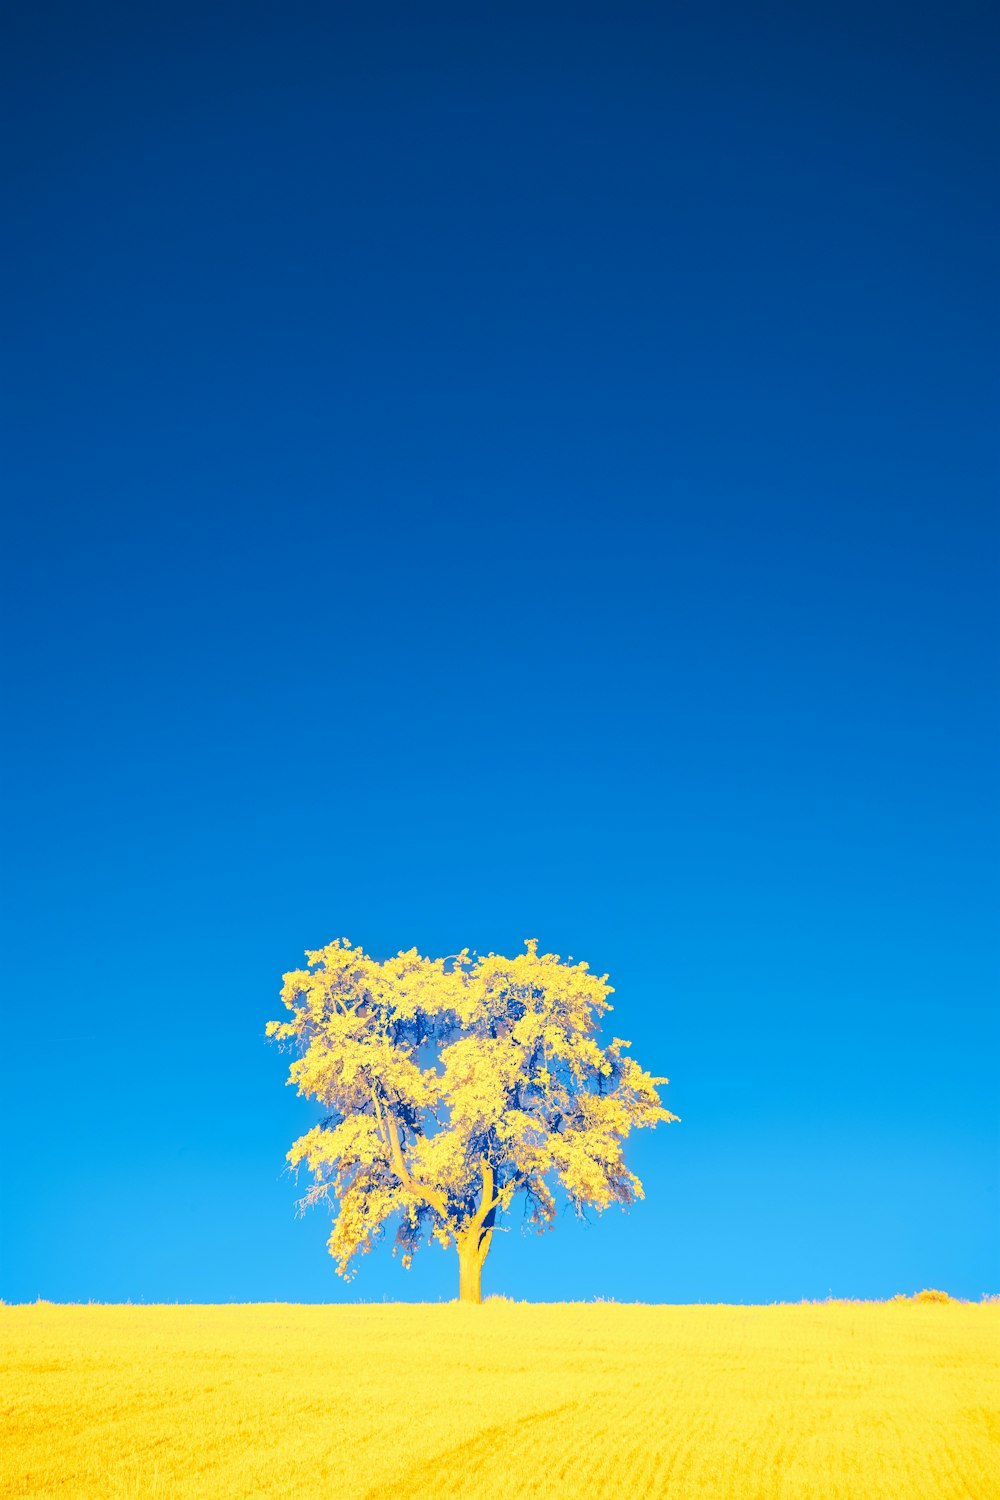 a lone tree in a yellow field under a blue sky